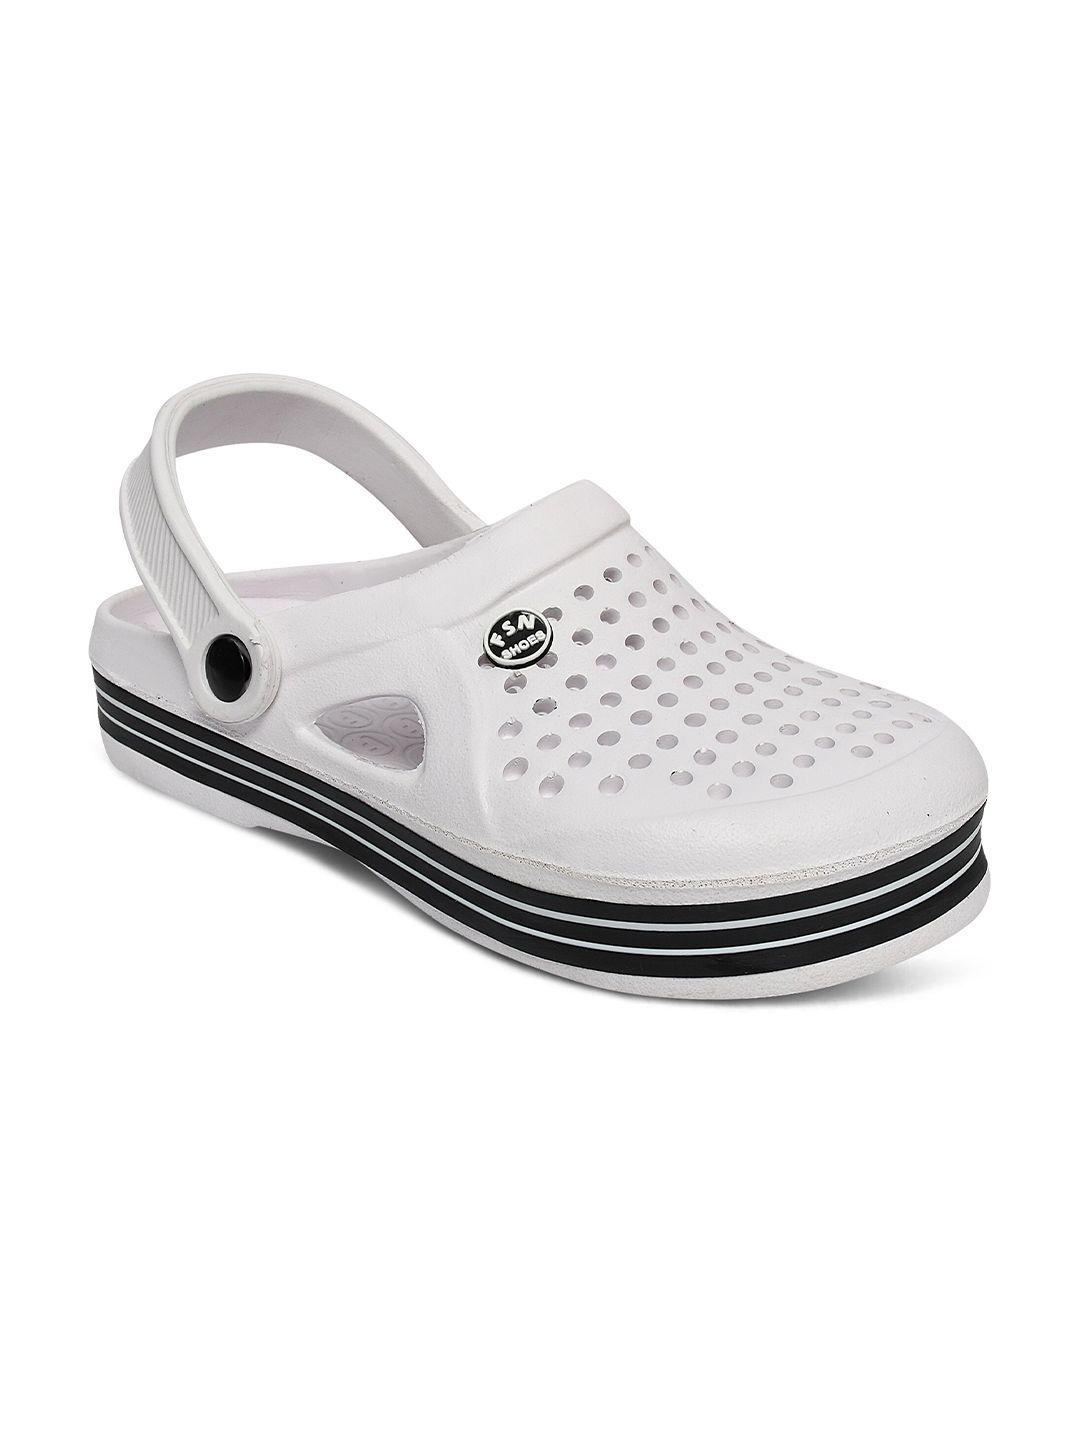 airspot ultra-comfortable & relaxing clogs